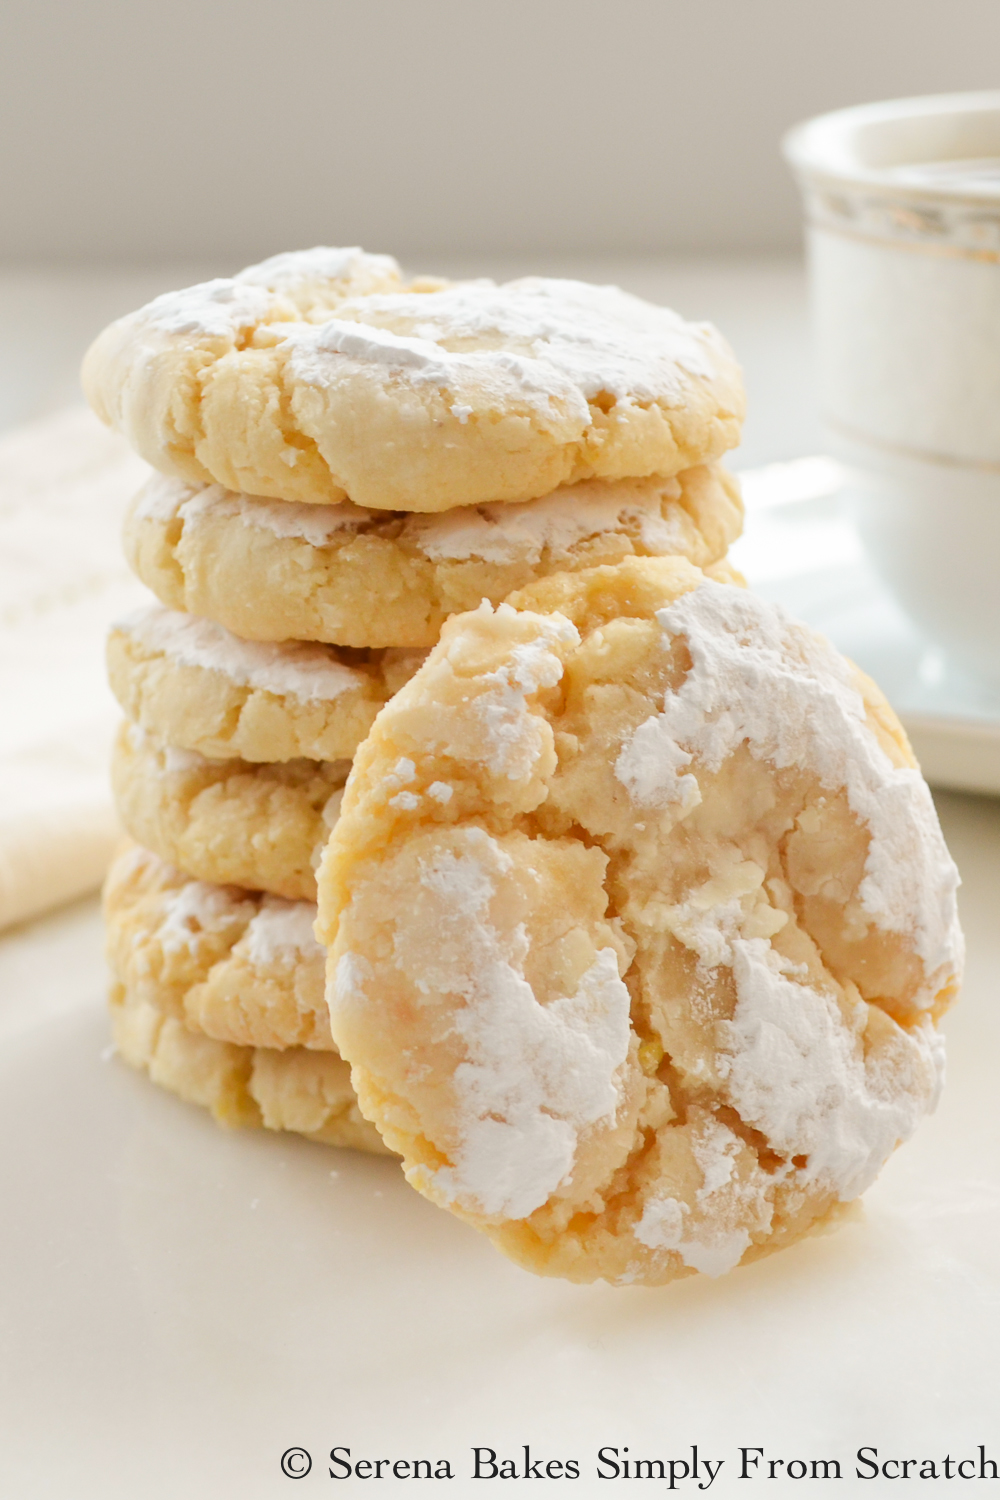 25 Last Minute Christmas Cookie Ideas. Soft and Chewy Lemon Cookies.